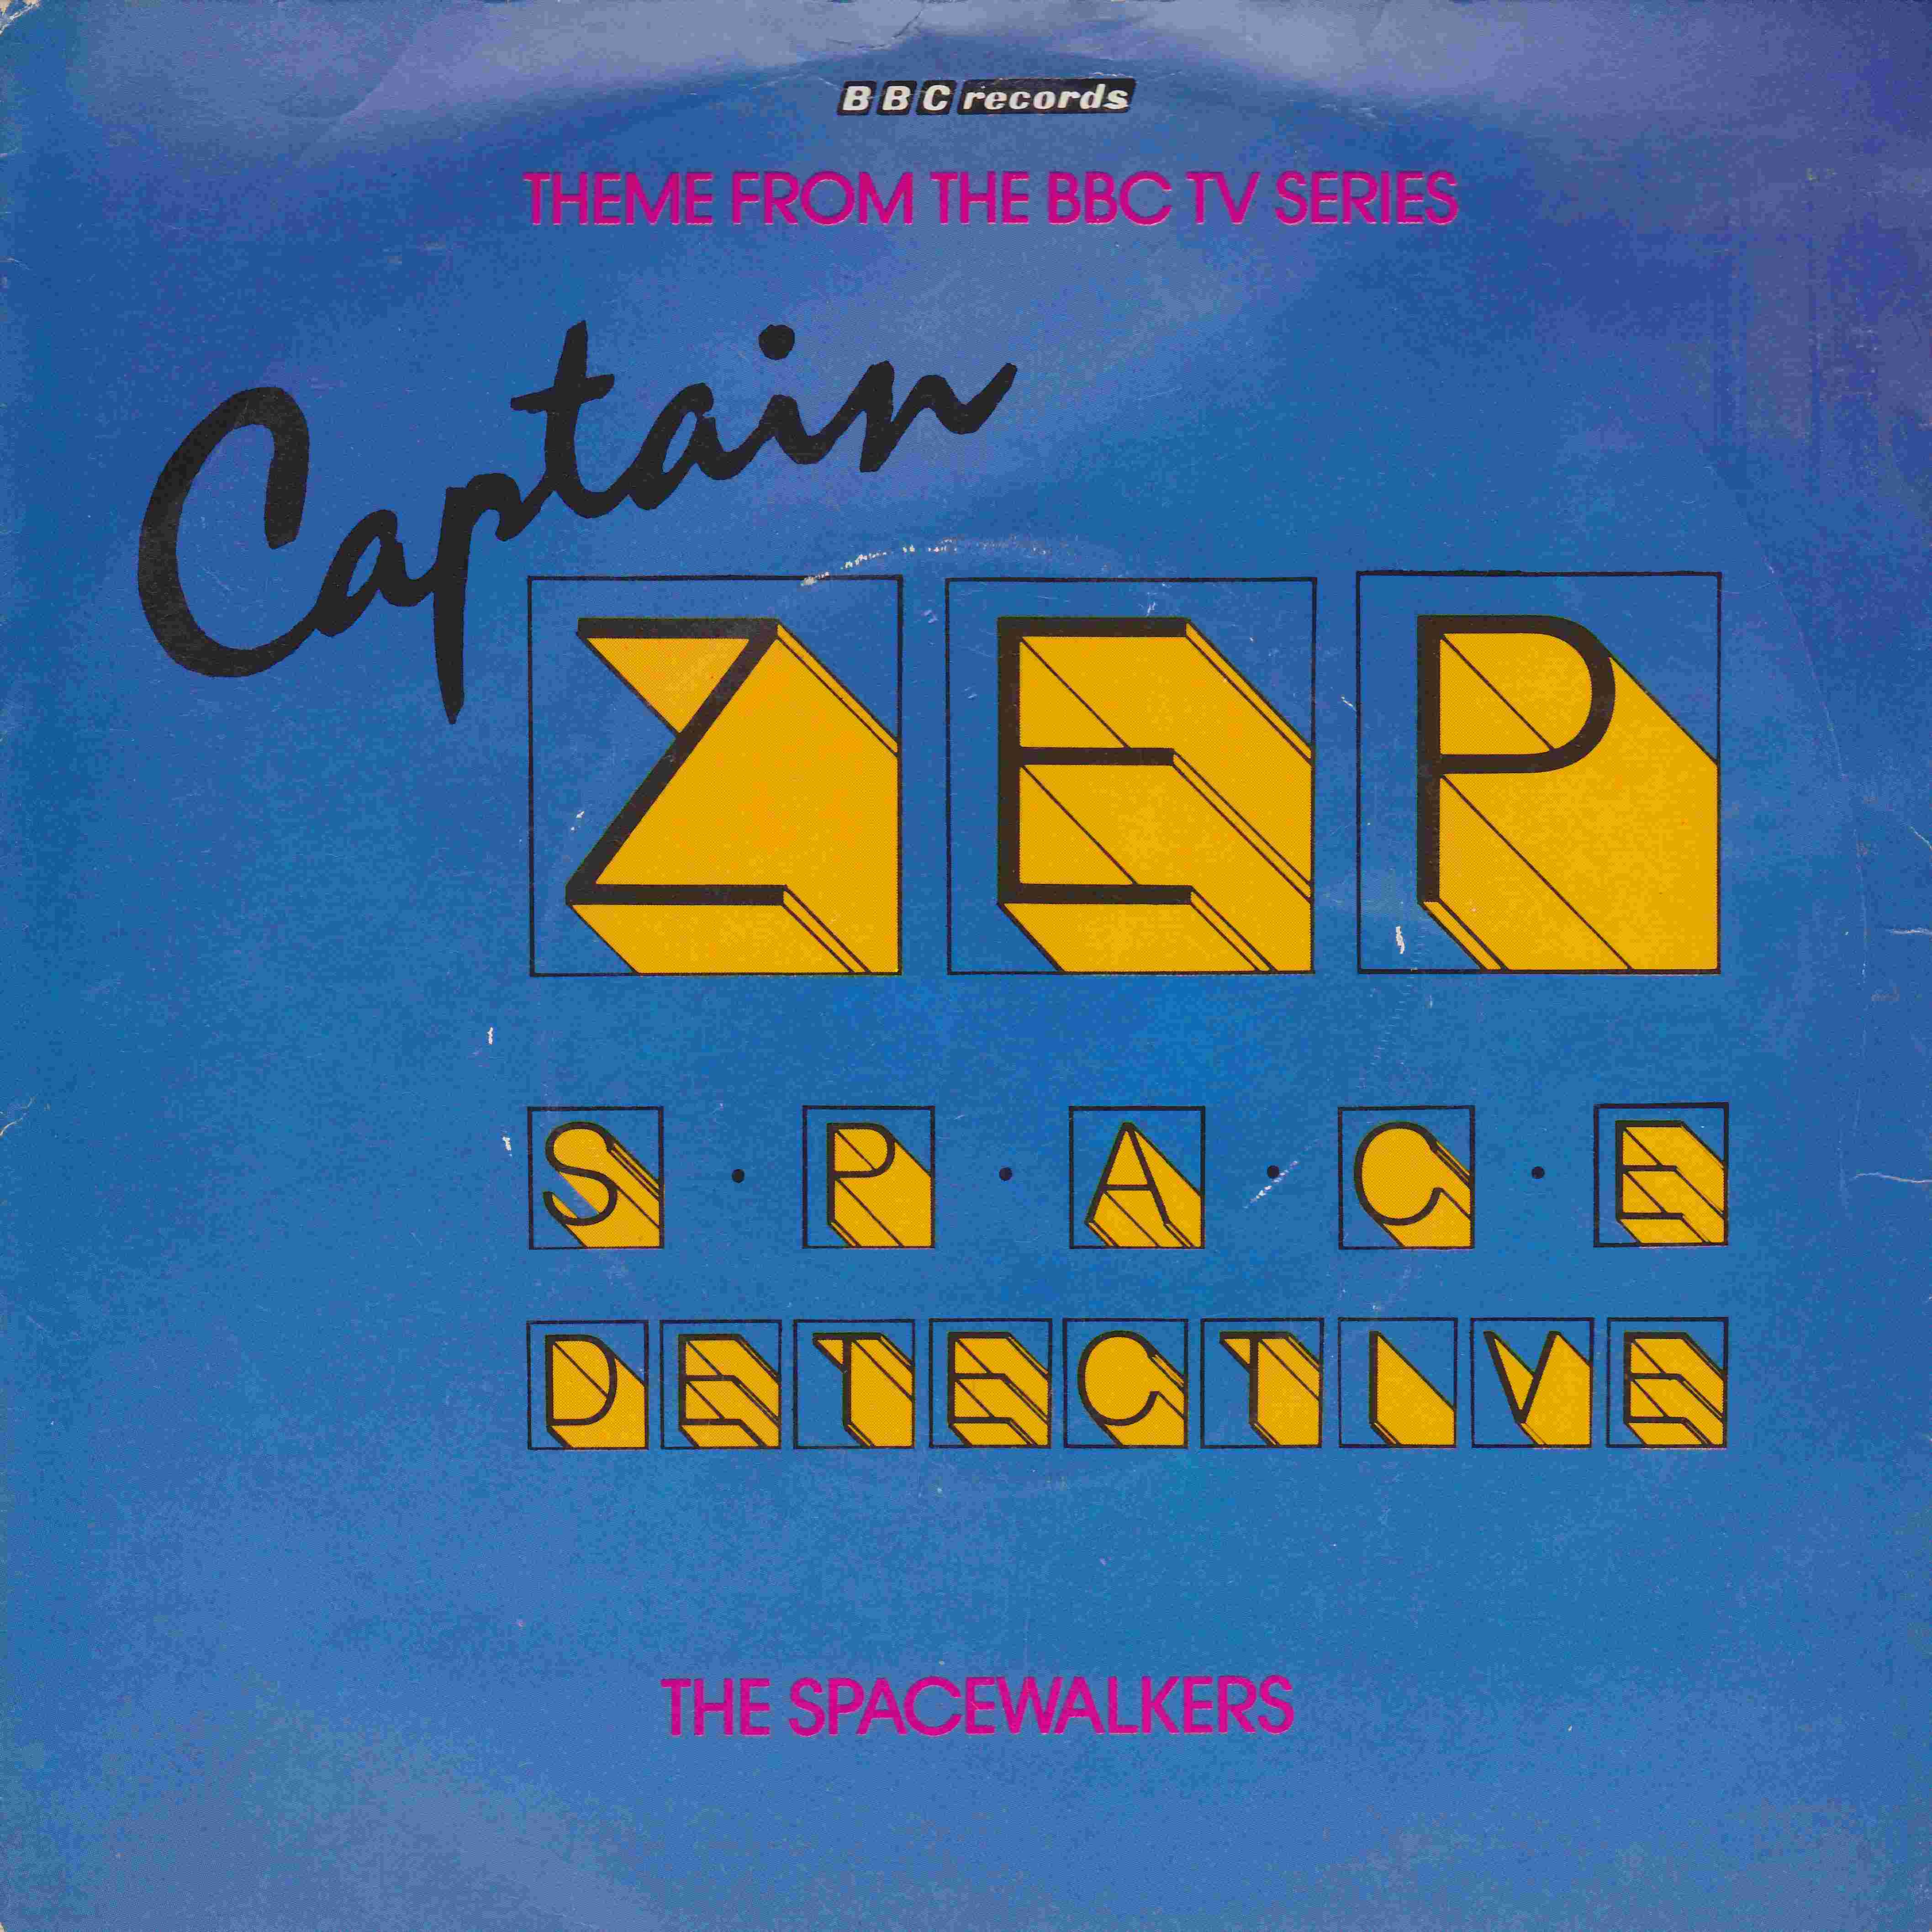 Picture of RESL 127 Captain Zep by artist David Smith / Paul Aitken from the BBC records and Tapes library